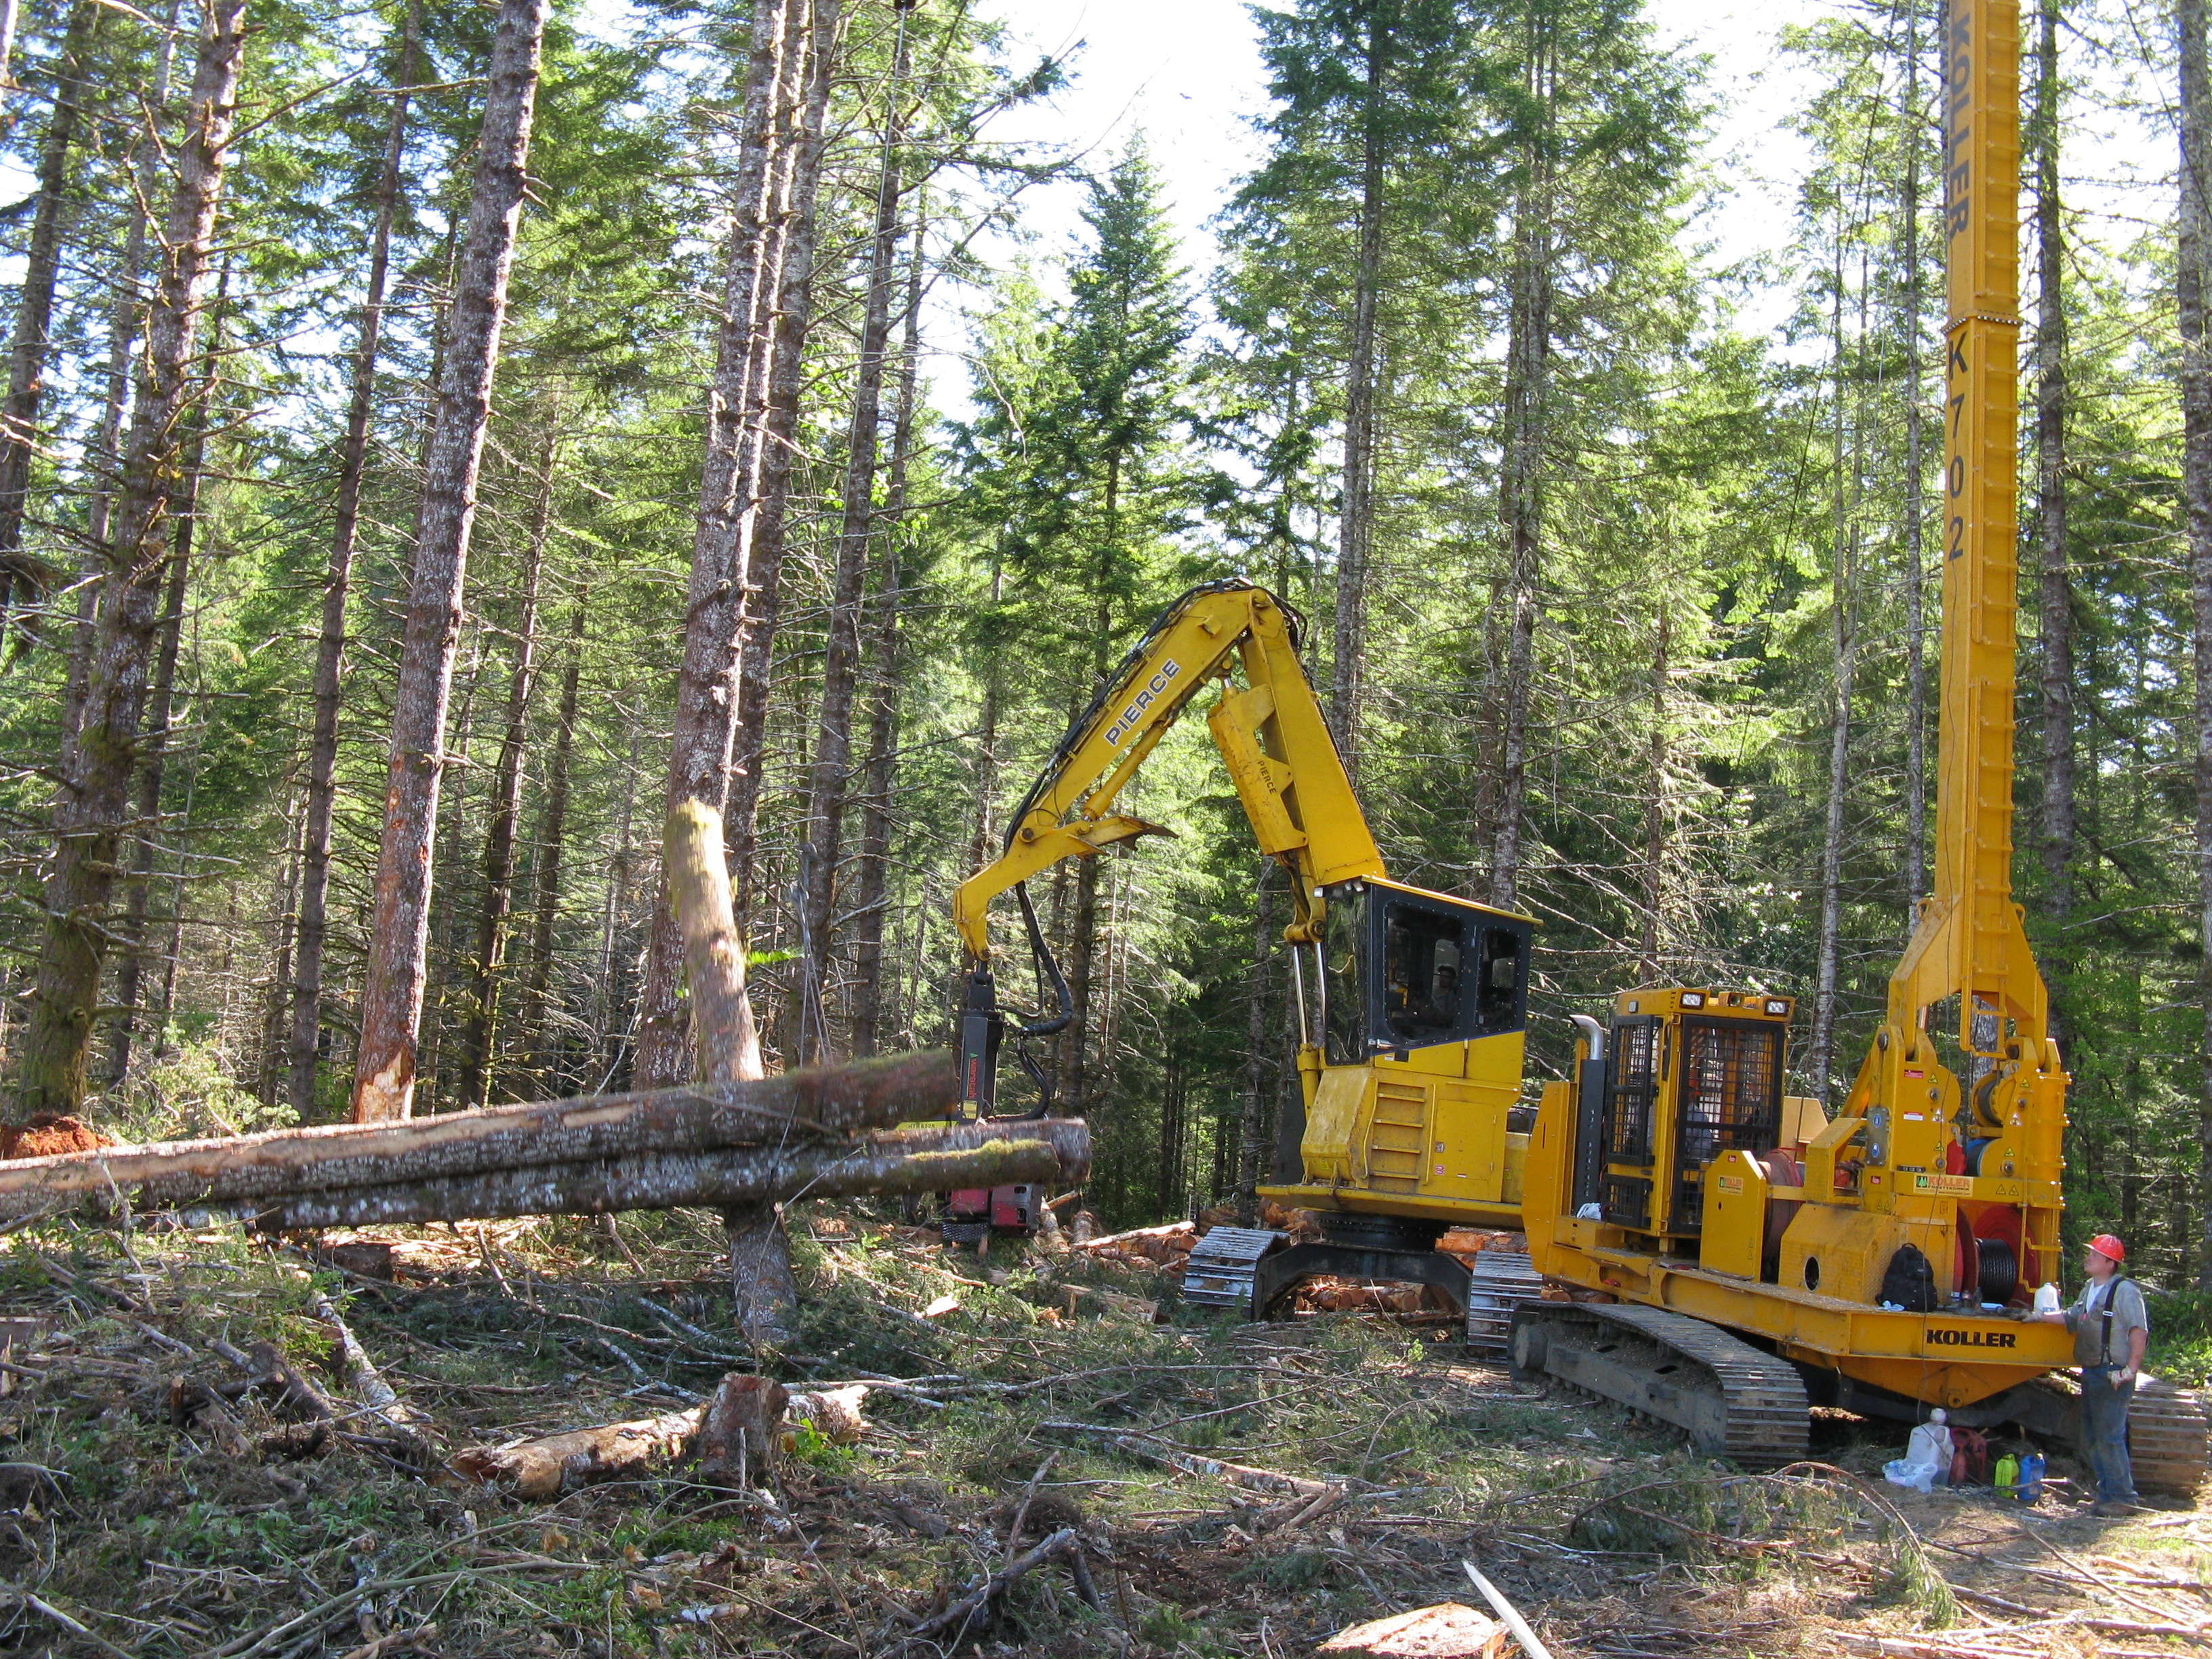 Logging operation on the Siuslaw National Forest